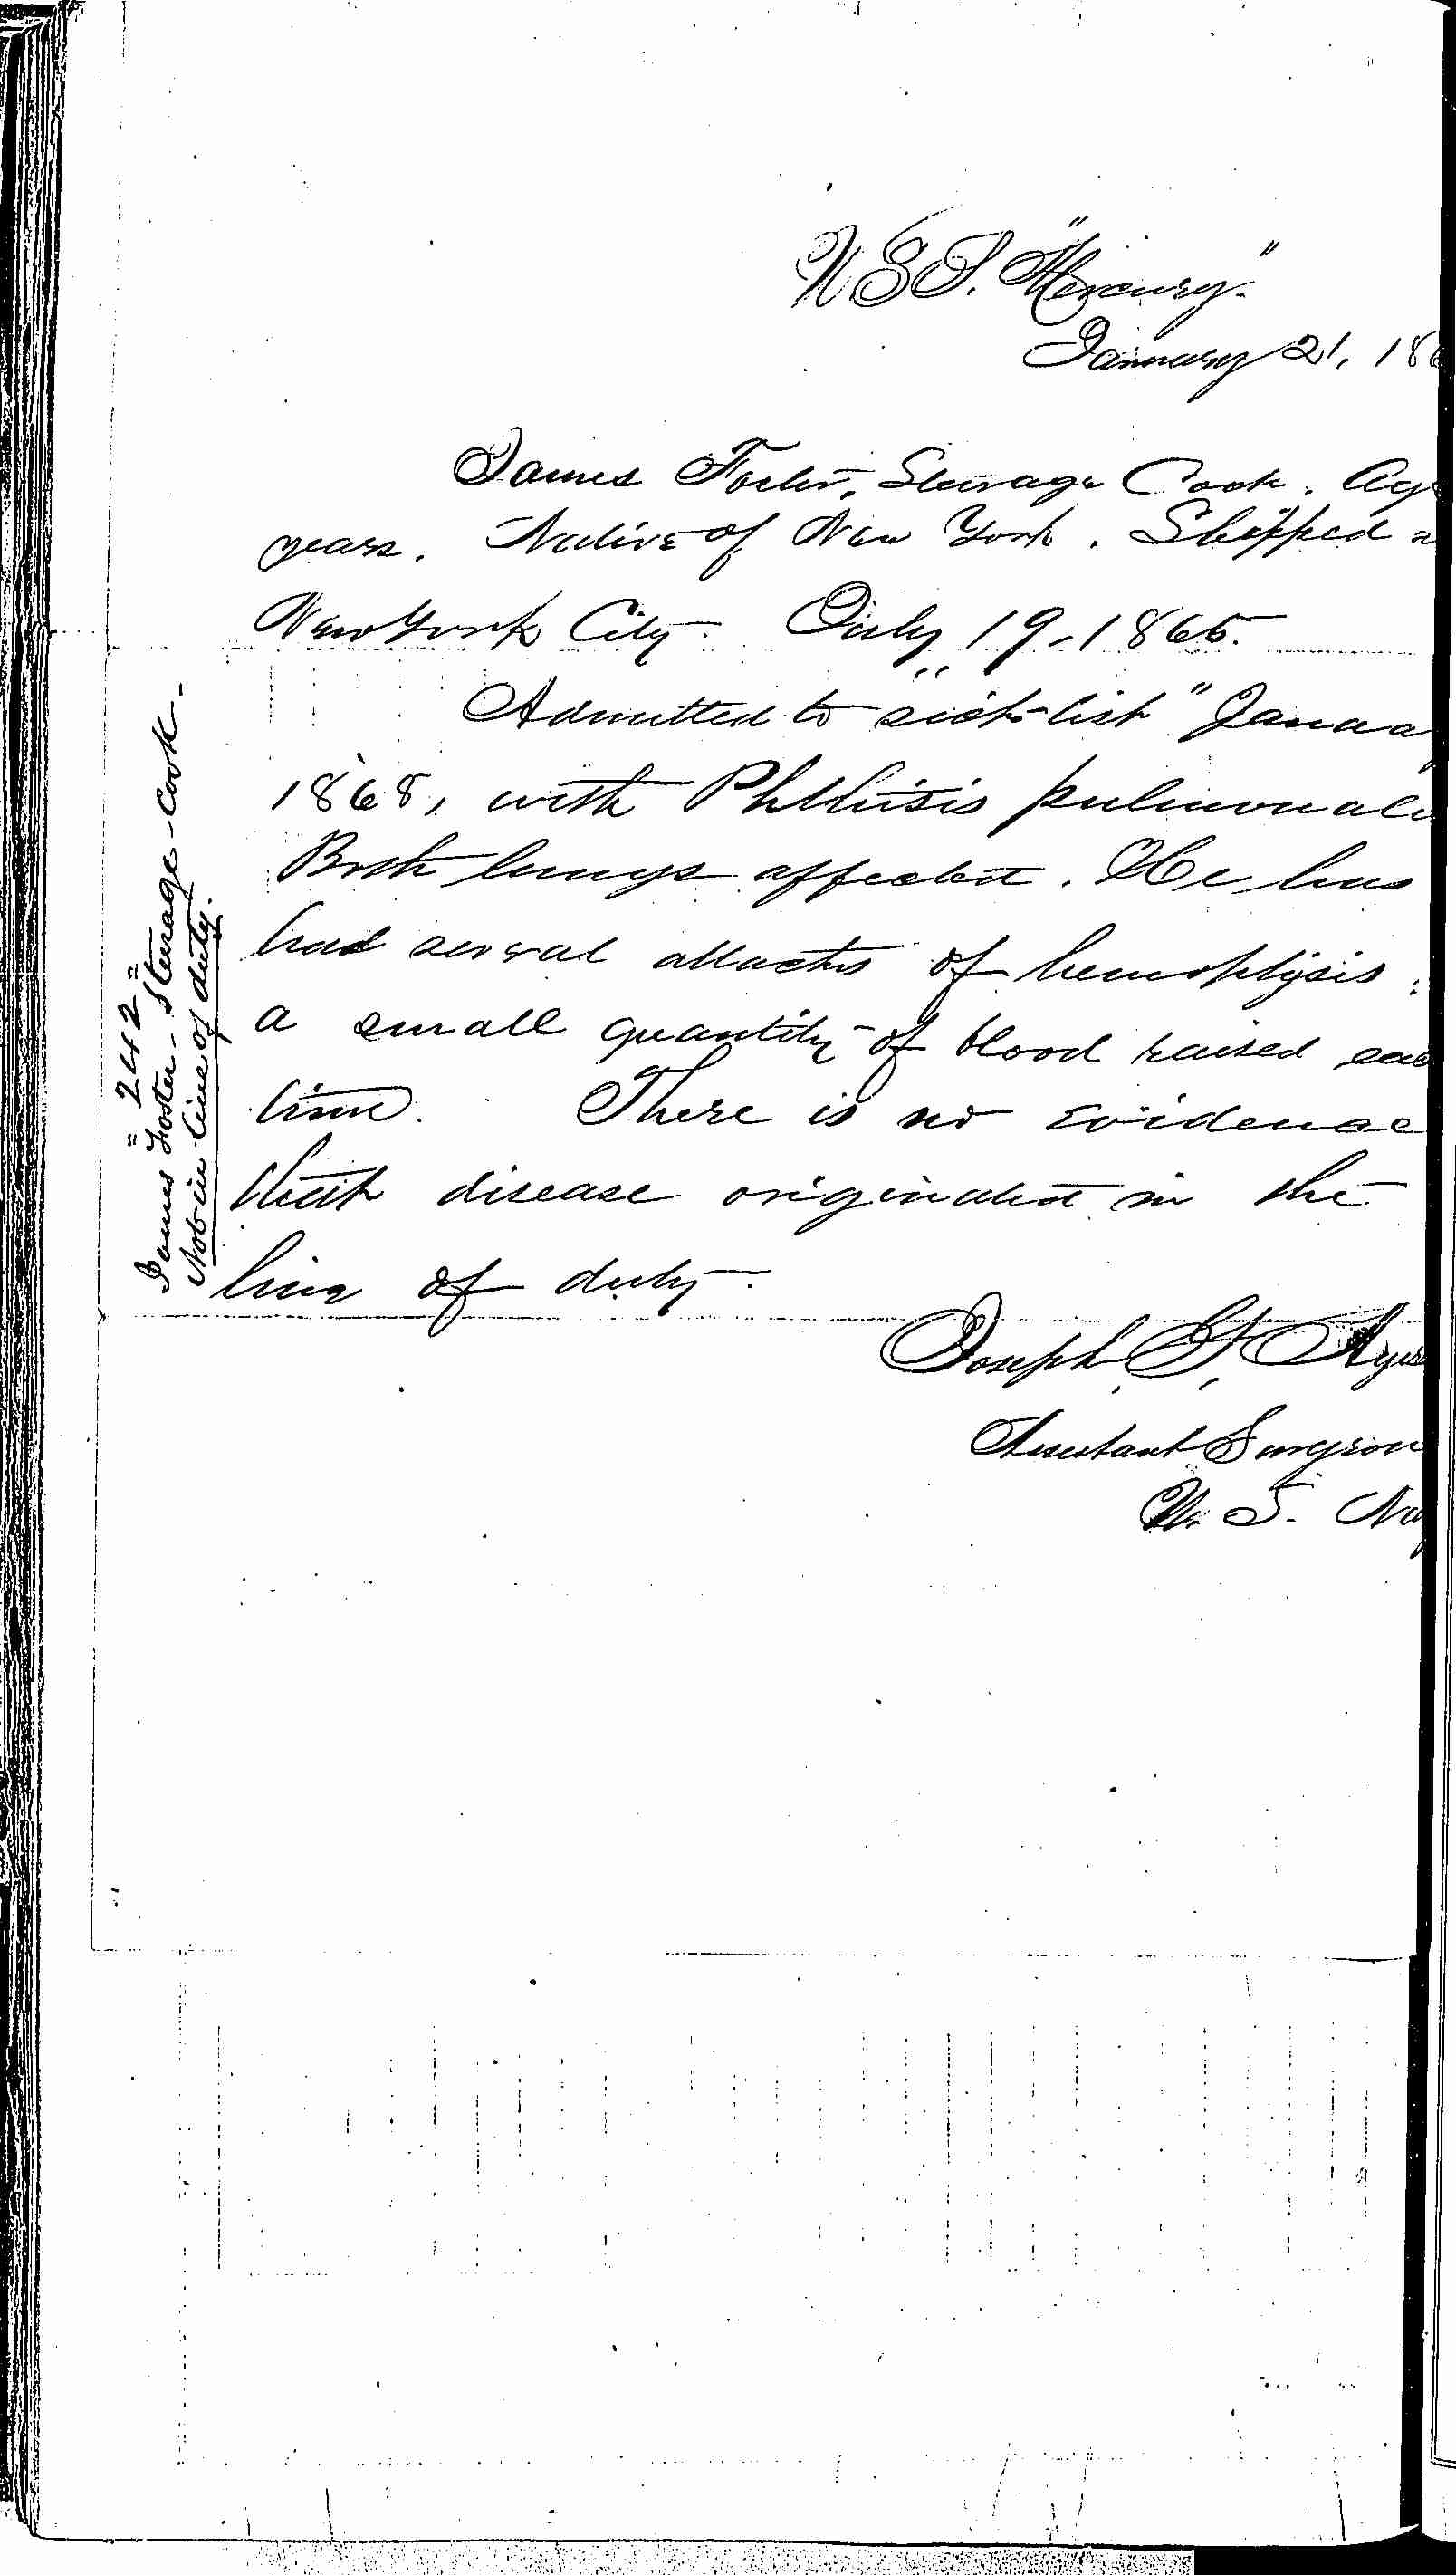 Entry for James Foster (page 2 of 2) in the log Hospital Tickets and Case Papers - Naval Hospital - Washington, D.C. - 1866-68